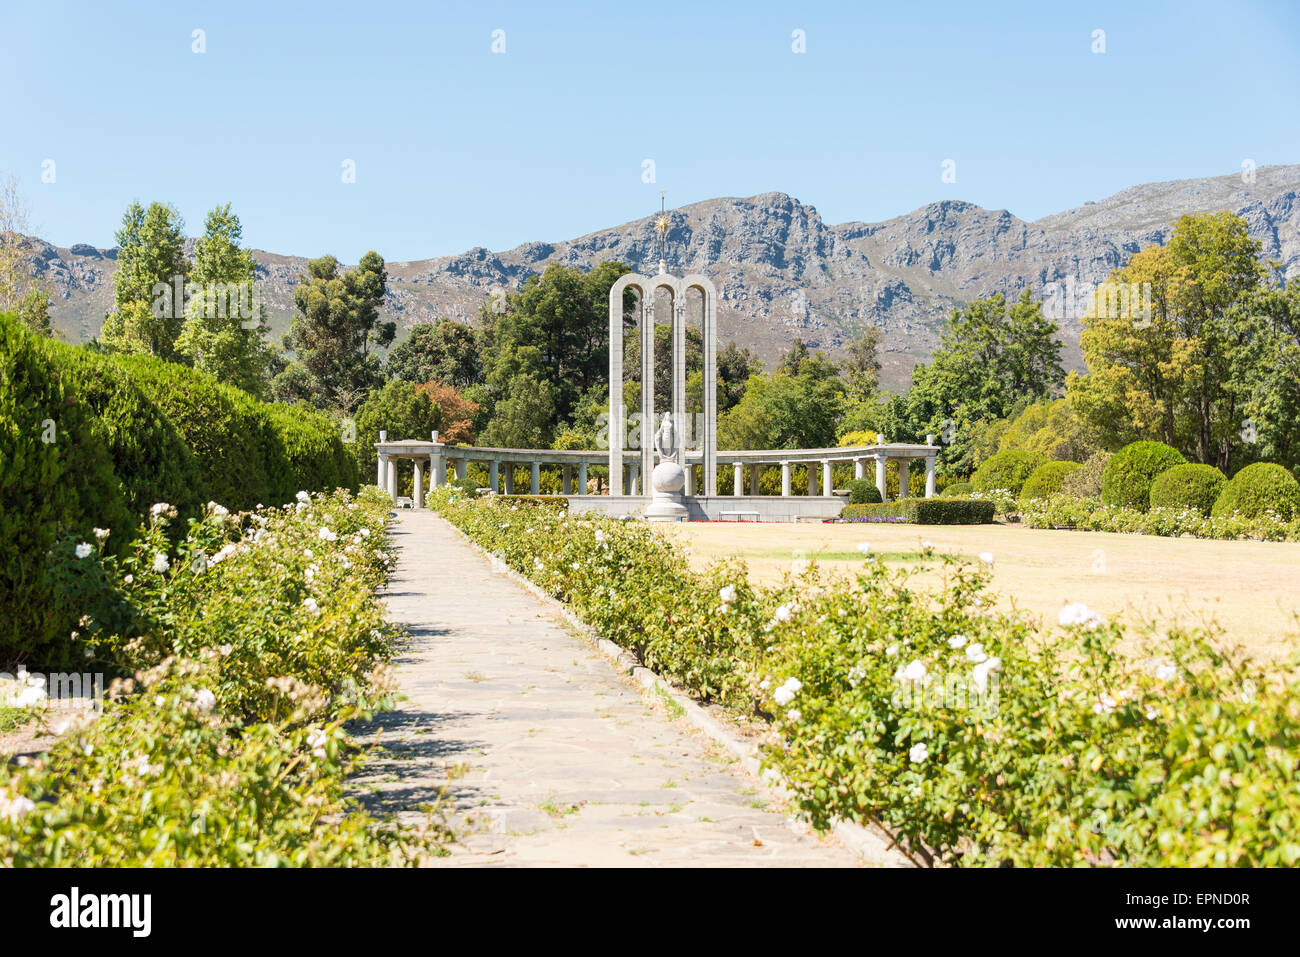 The Huguenot Memorial Monument, Franschhoek, Cape Winelands District, Western Cape Province, Republic of South Africa Stock Photo